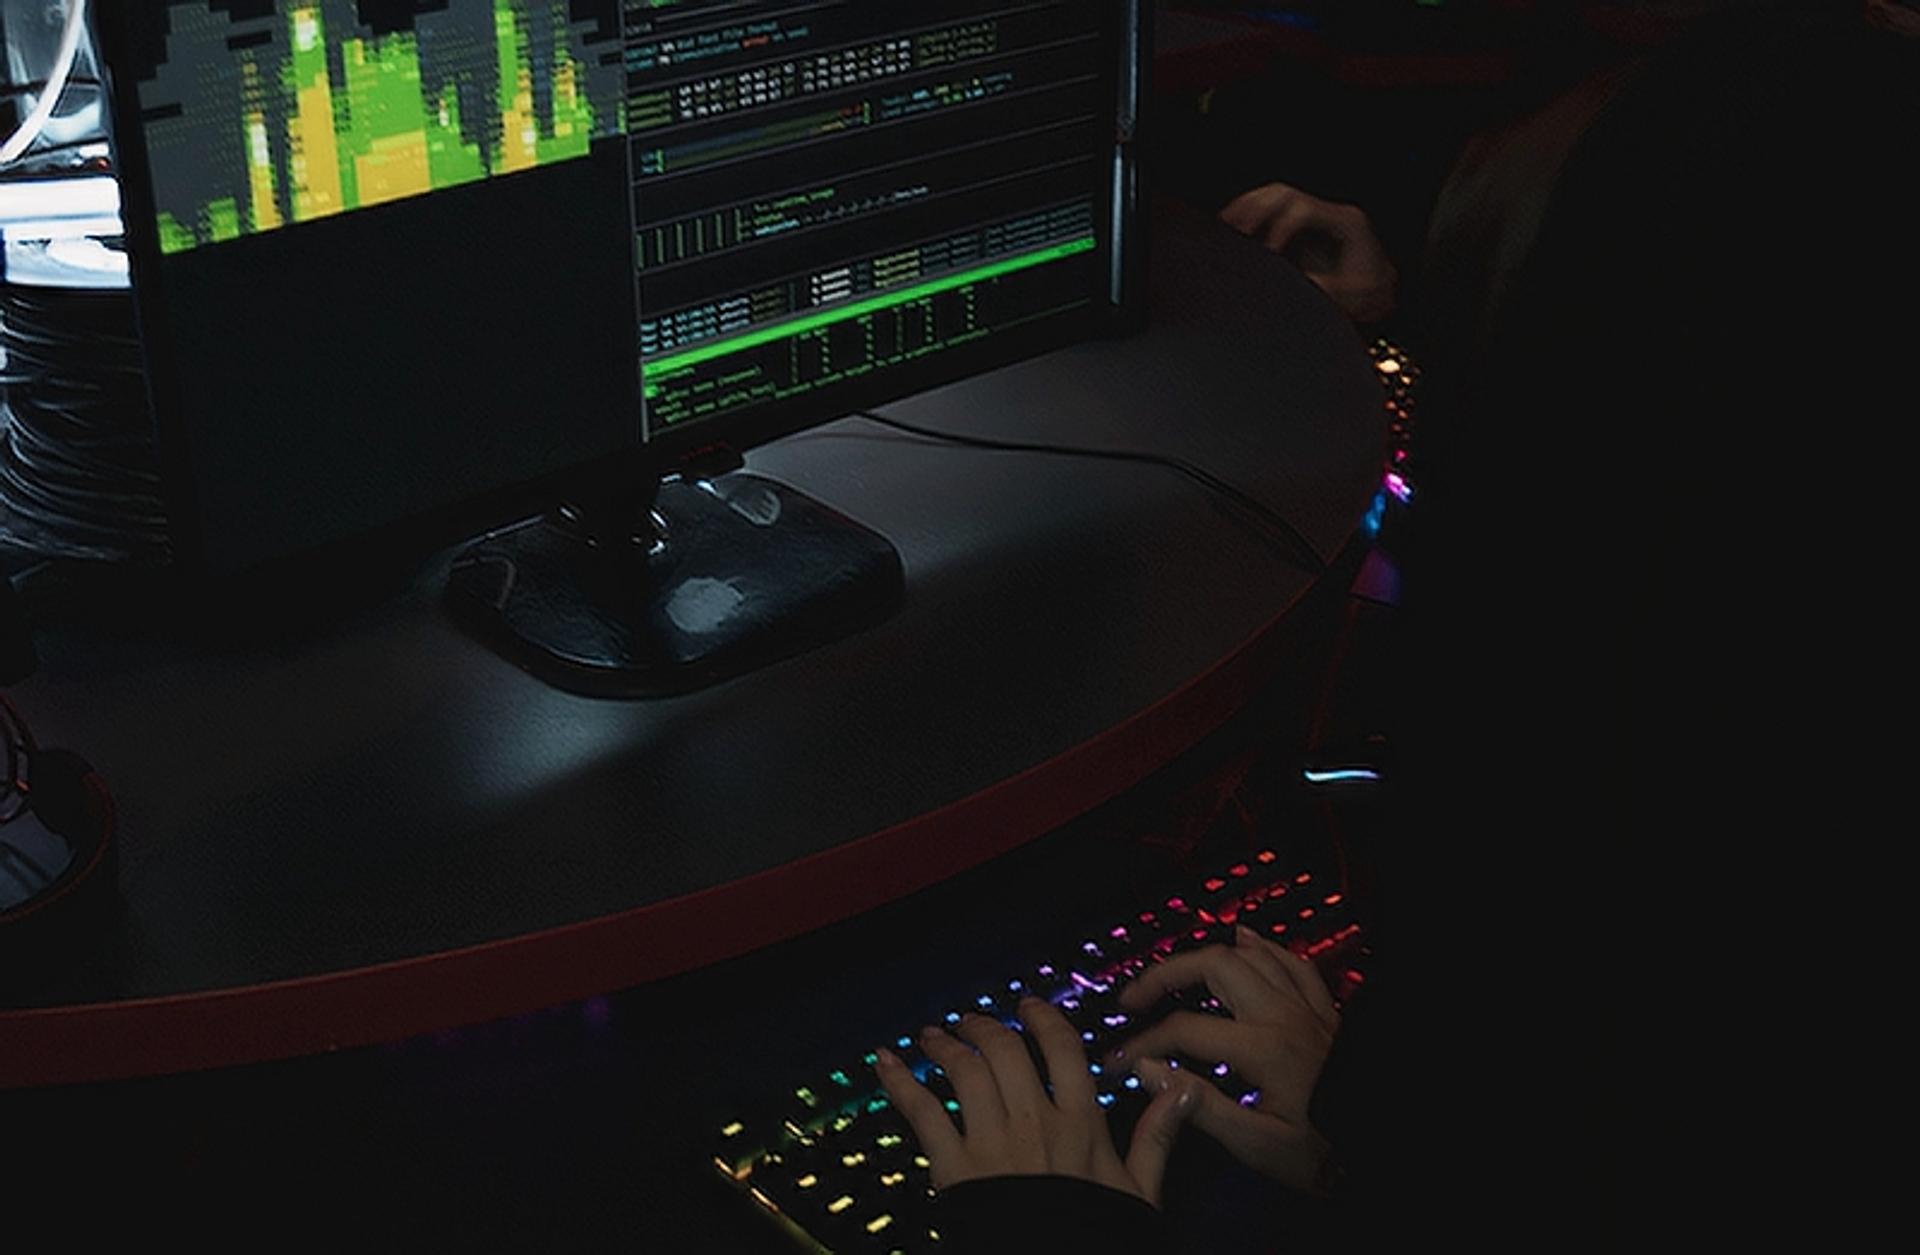 Hooded person using their computer in the dark